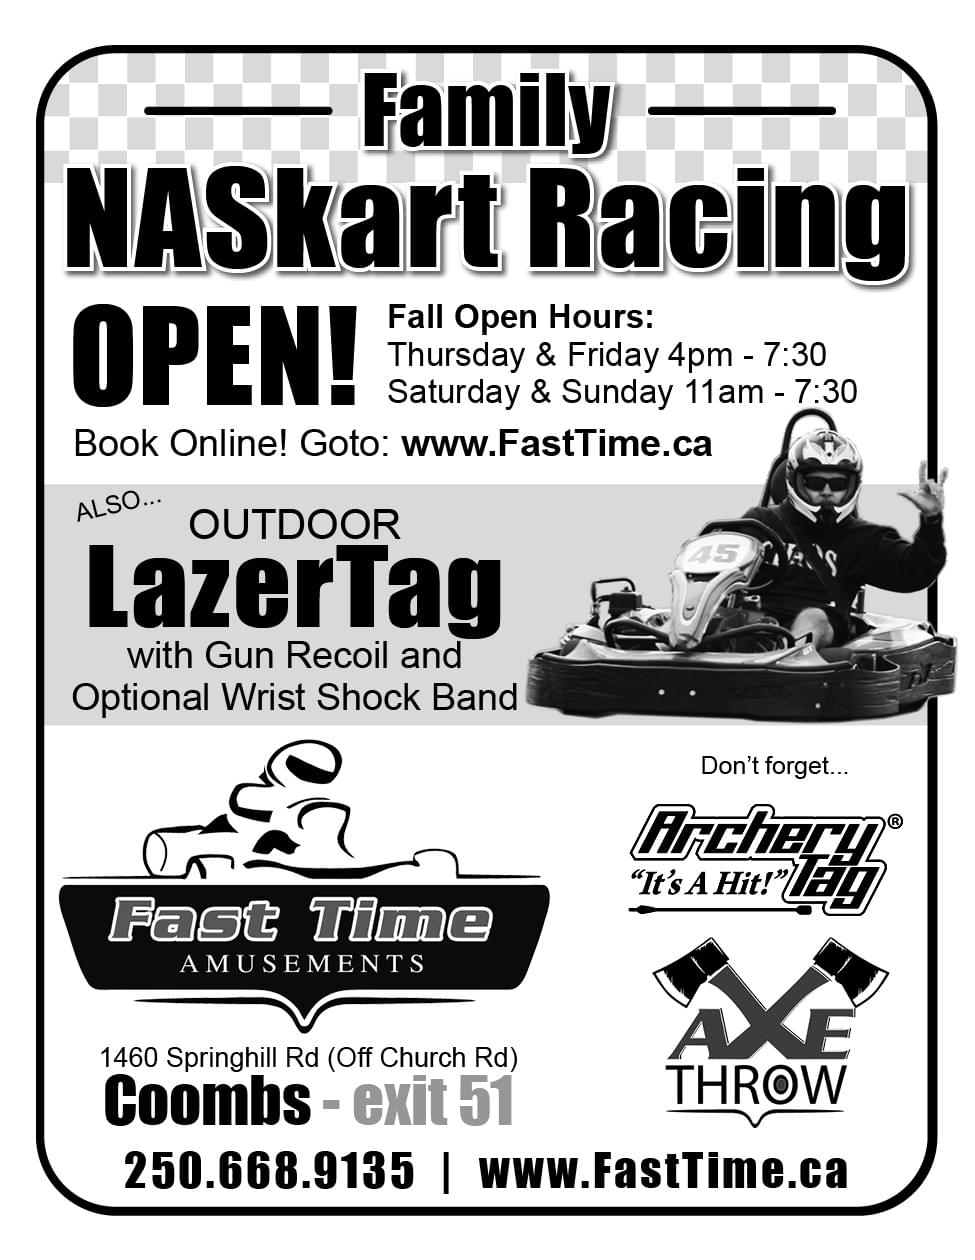 Fast time Ad in Coffee News